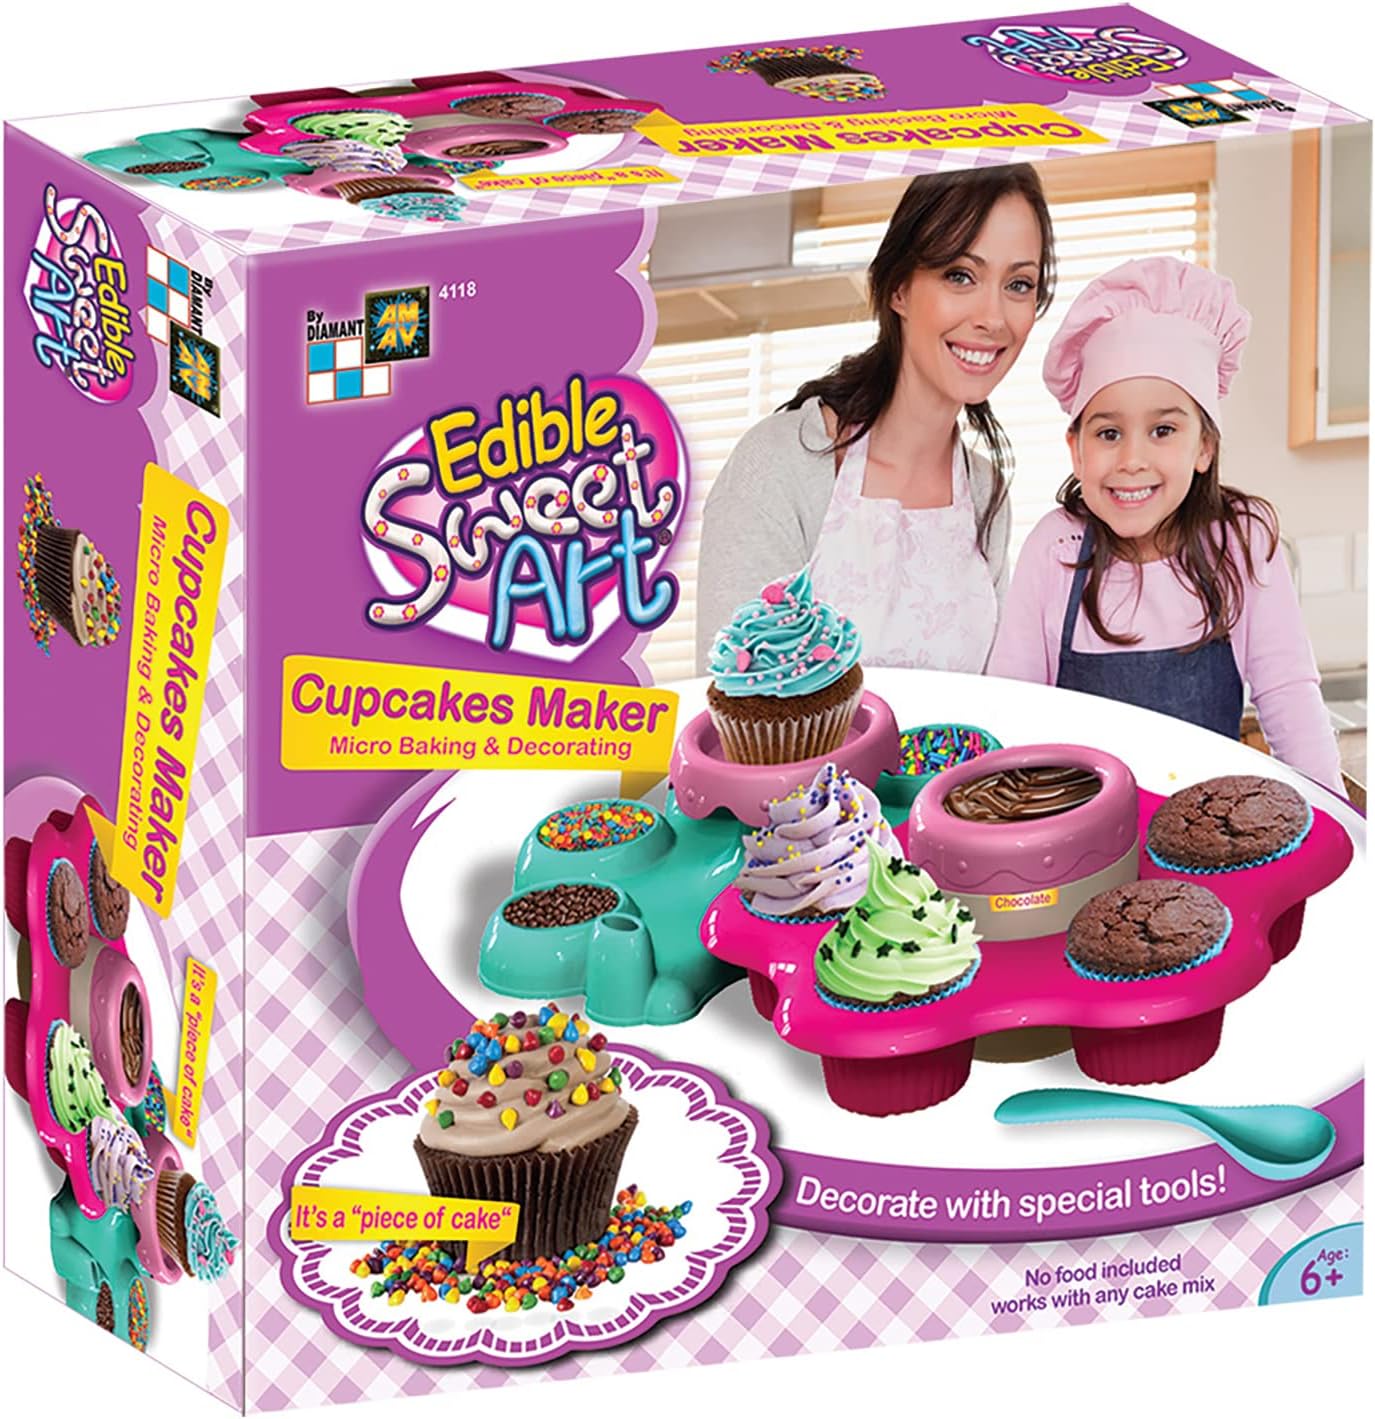 AMAV Toys Cupcake Maker Toy Activity Set Using Microwave Baking - DIY Make Your Own Delicious Treat - Edible Sweet Art